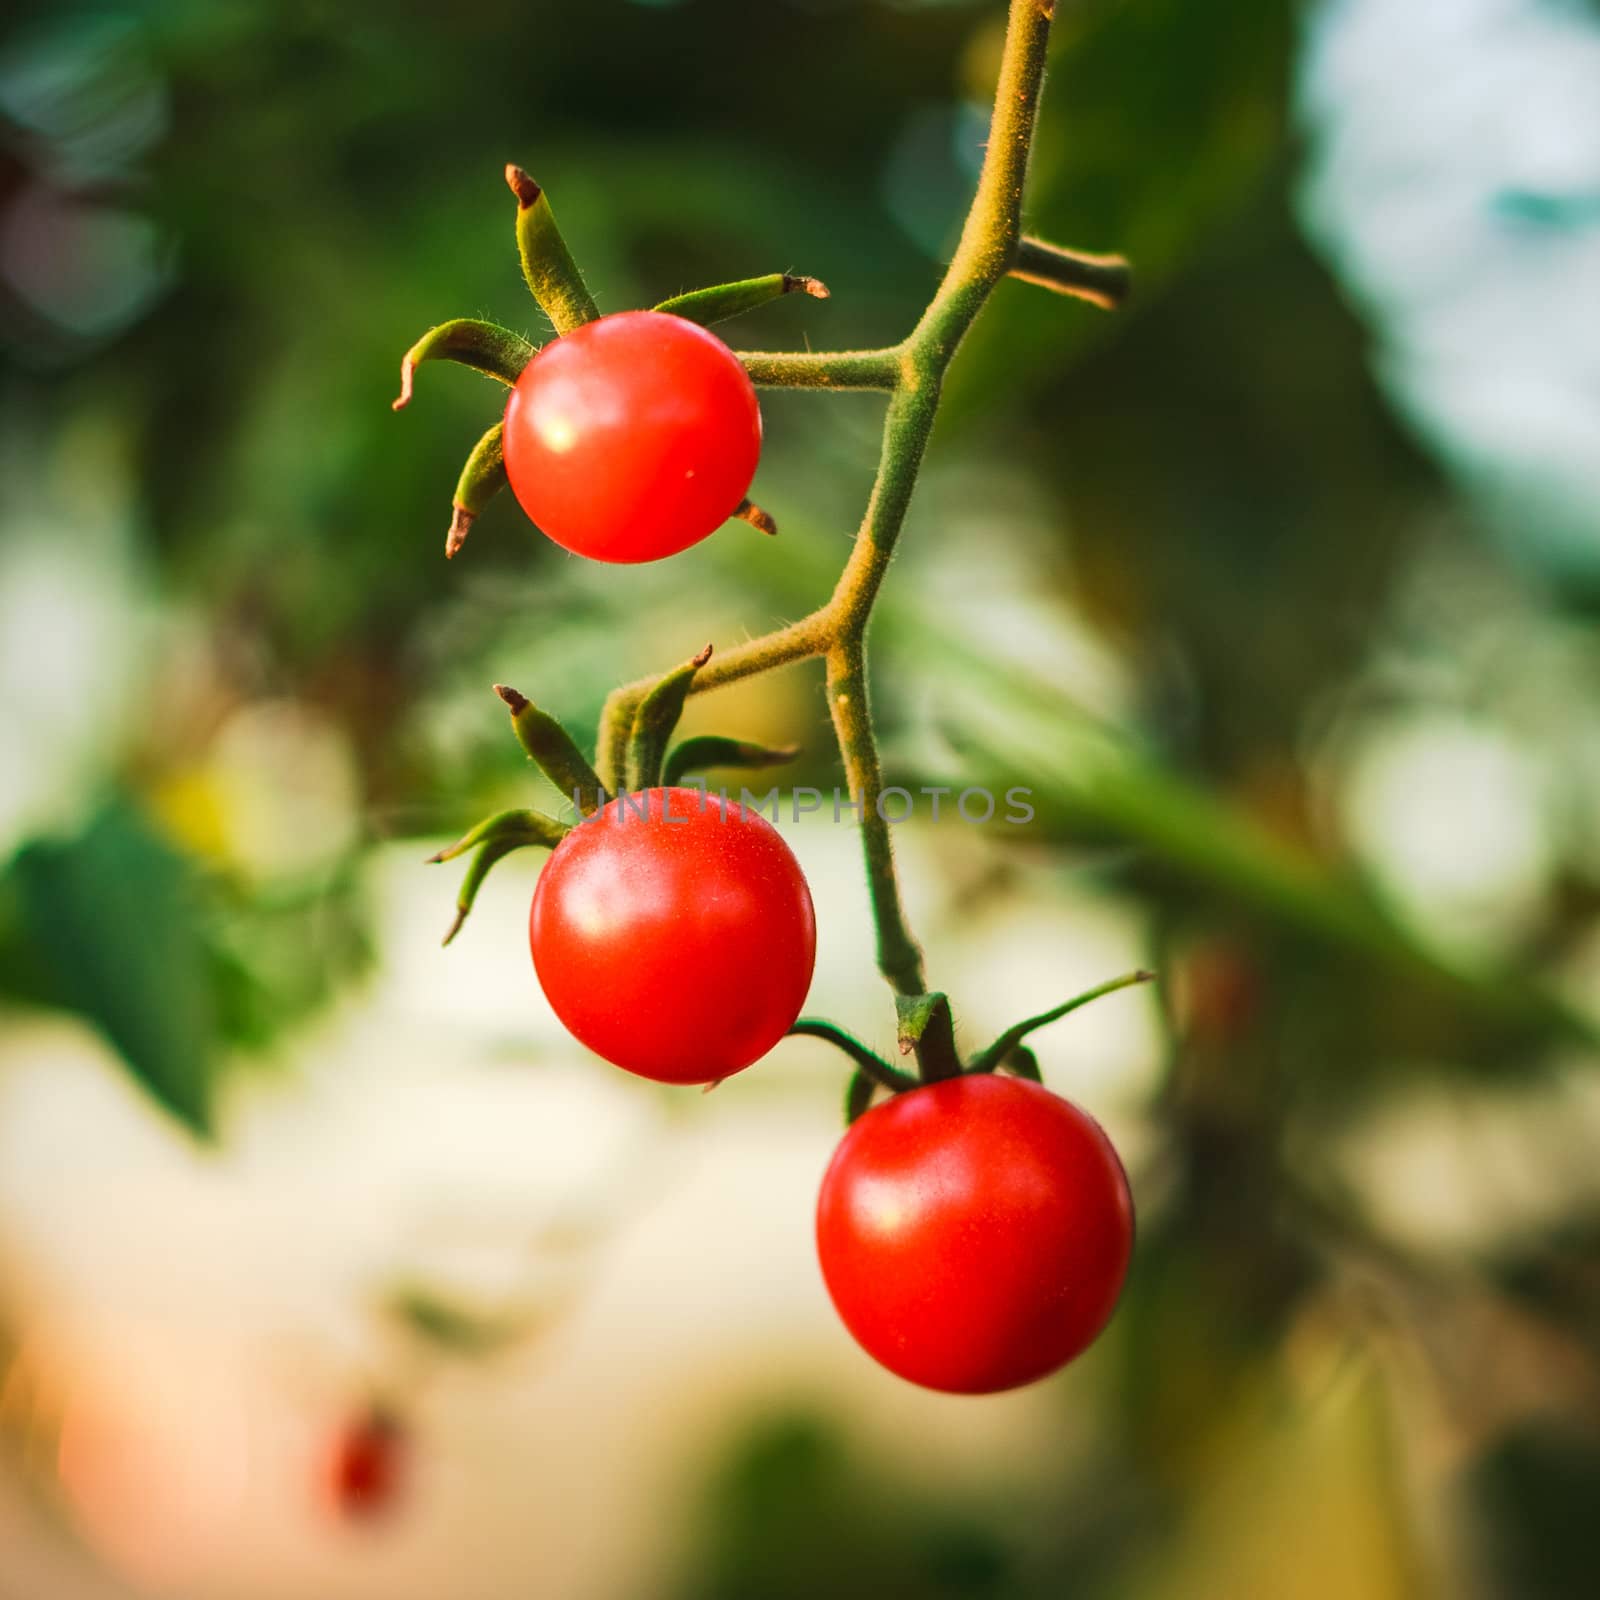 Cherry tomatoes in a garden by ryhor